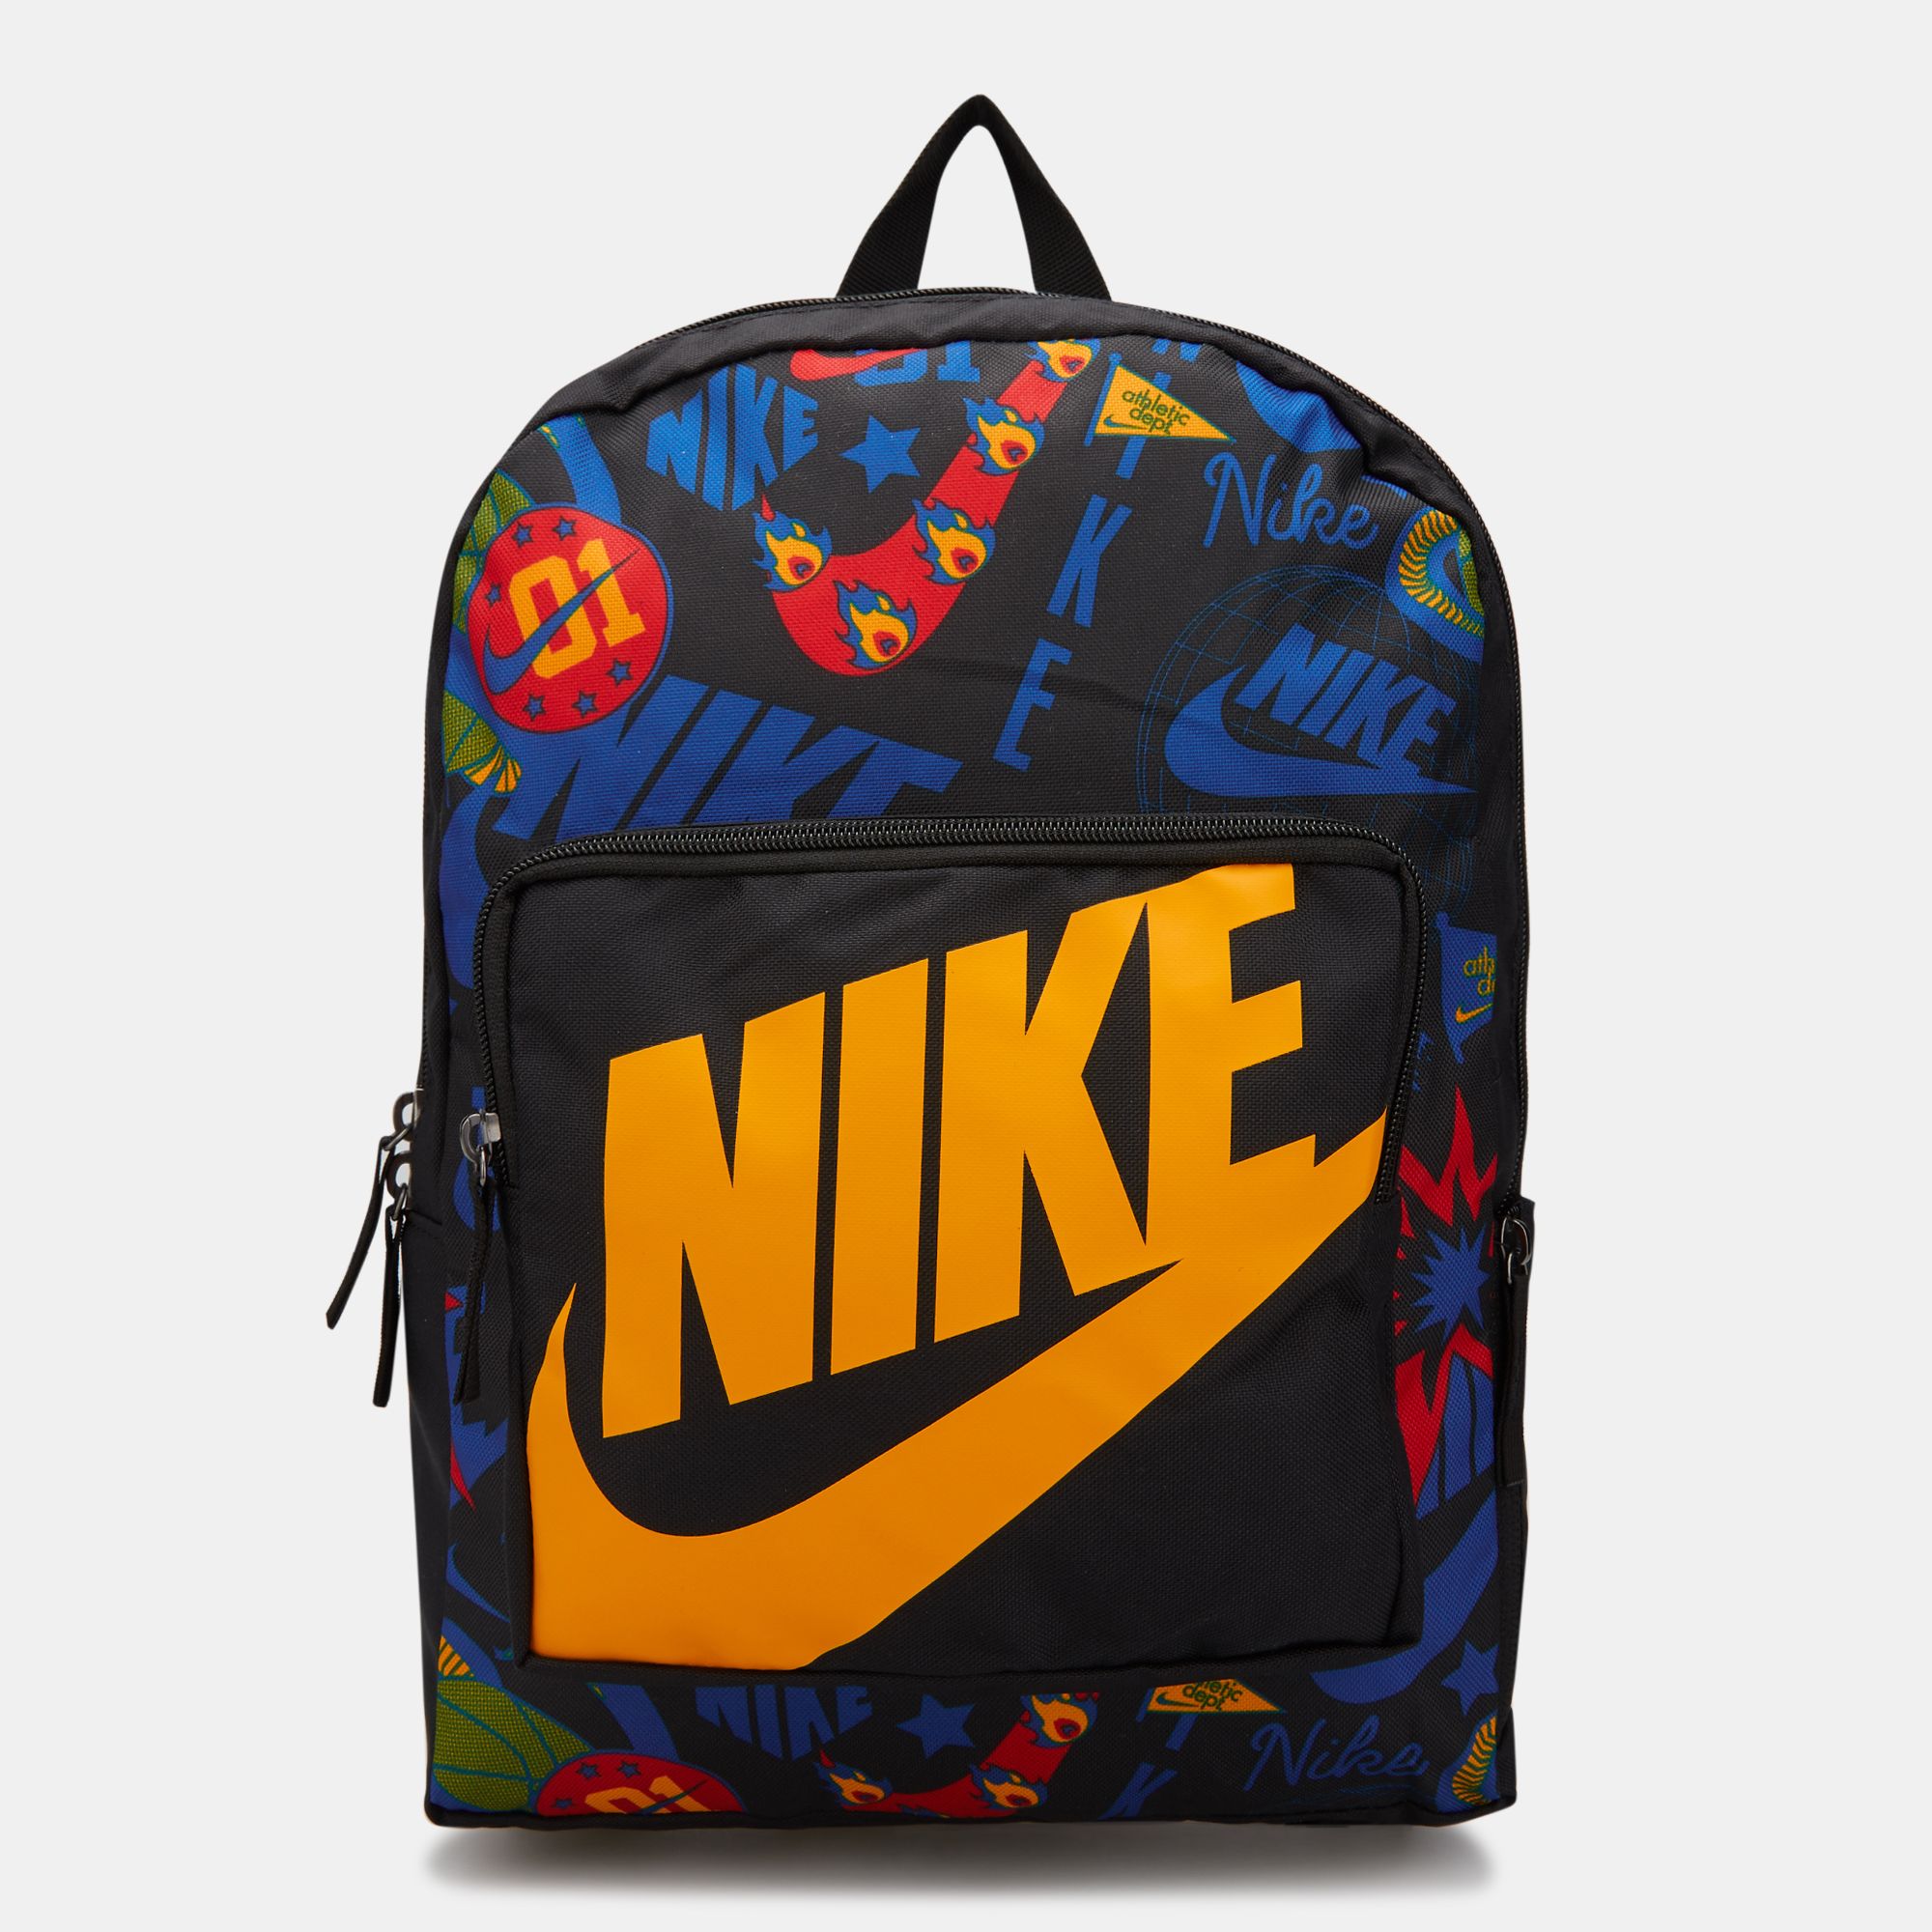 nike youth classic backpack online